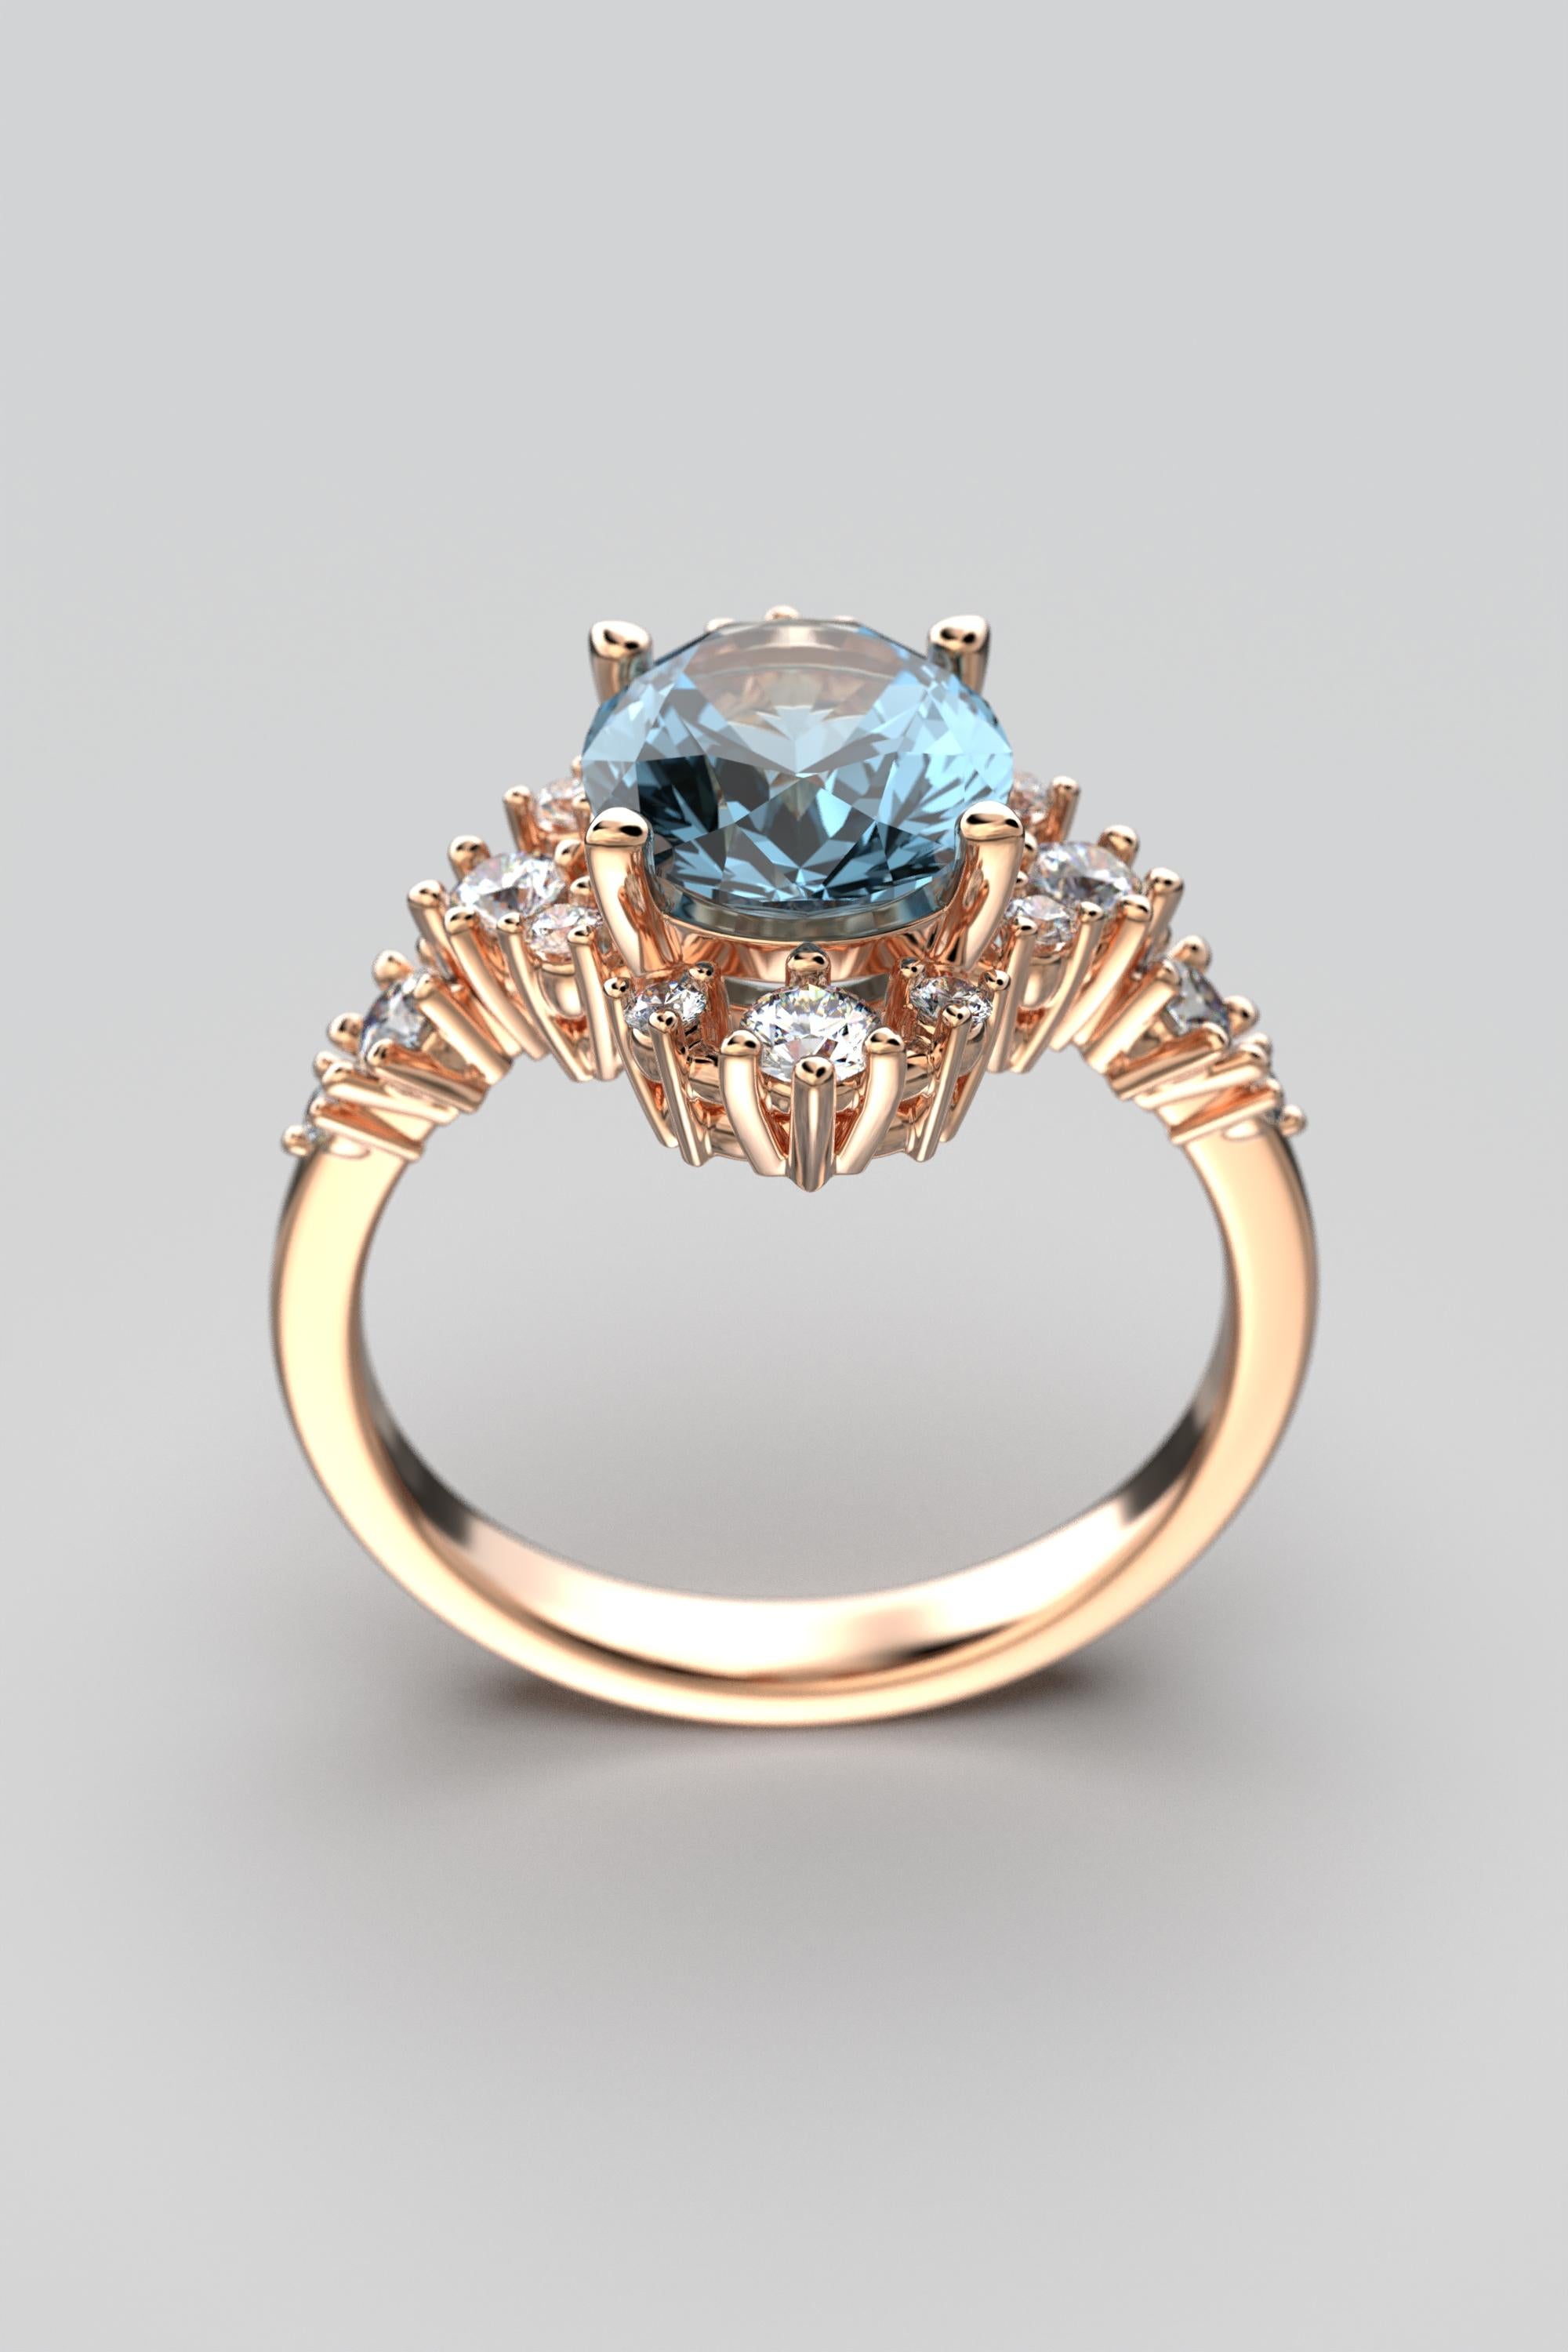 For Sale:  18k Gold Aquamarine Ring With Natural Diamonds Made in Italy Oltremare Gioielli 11